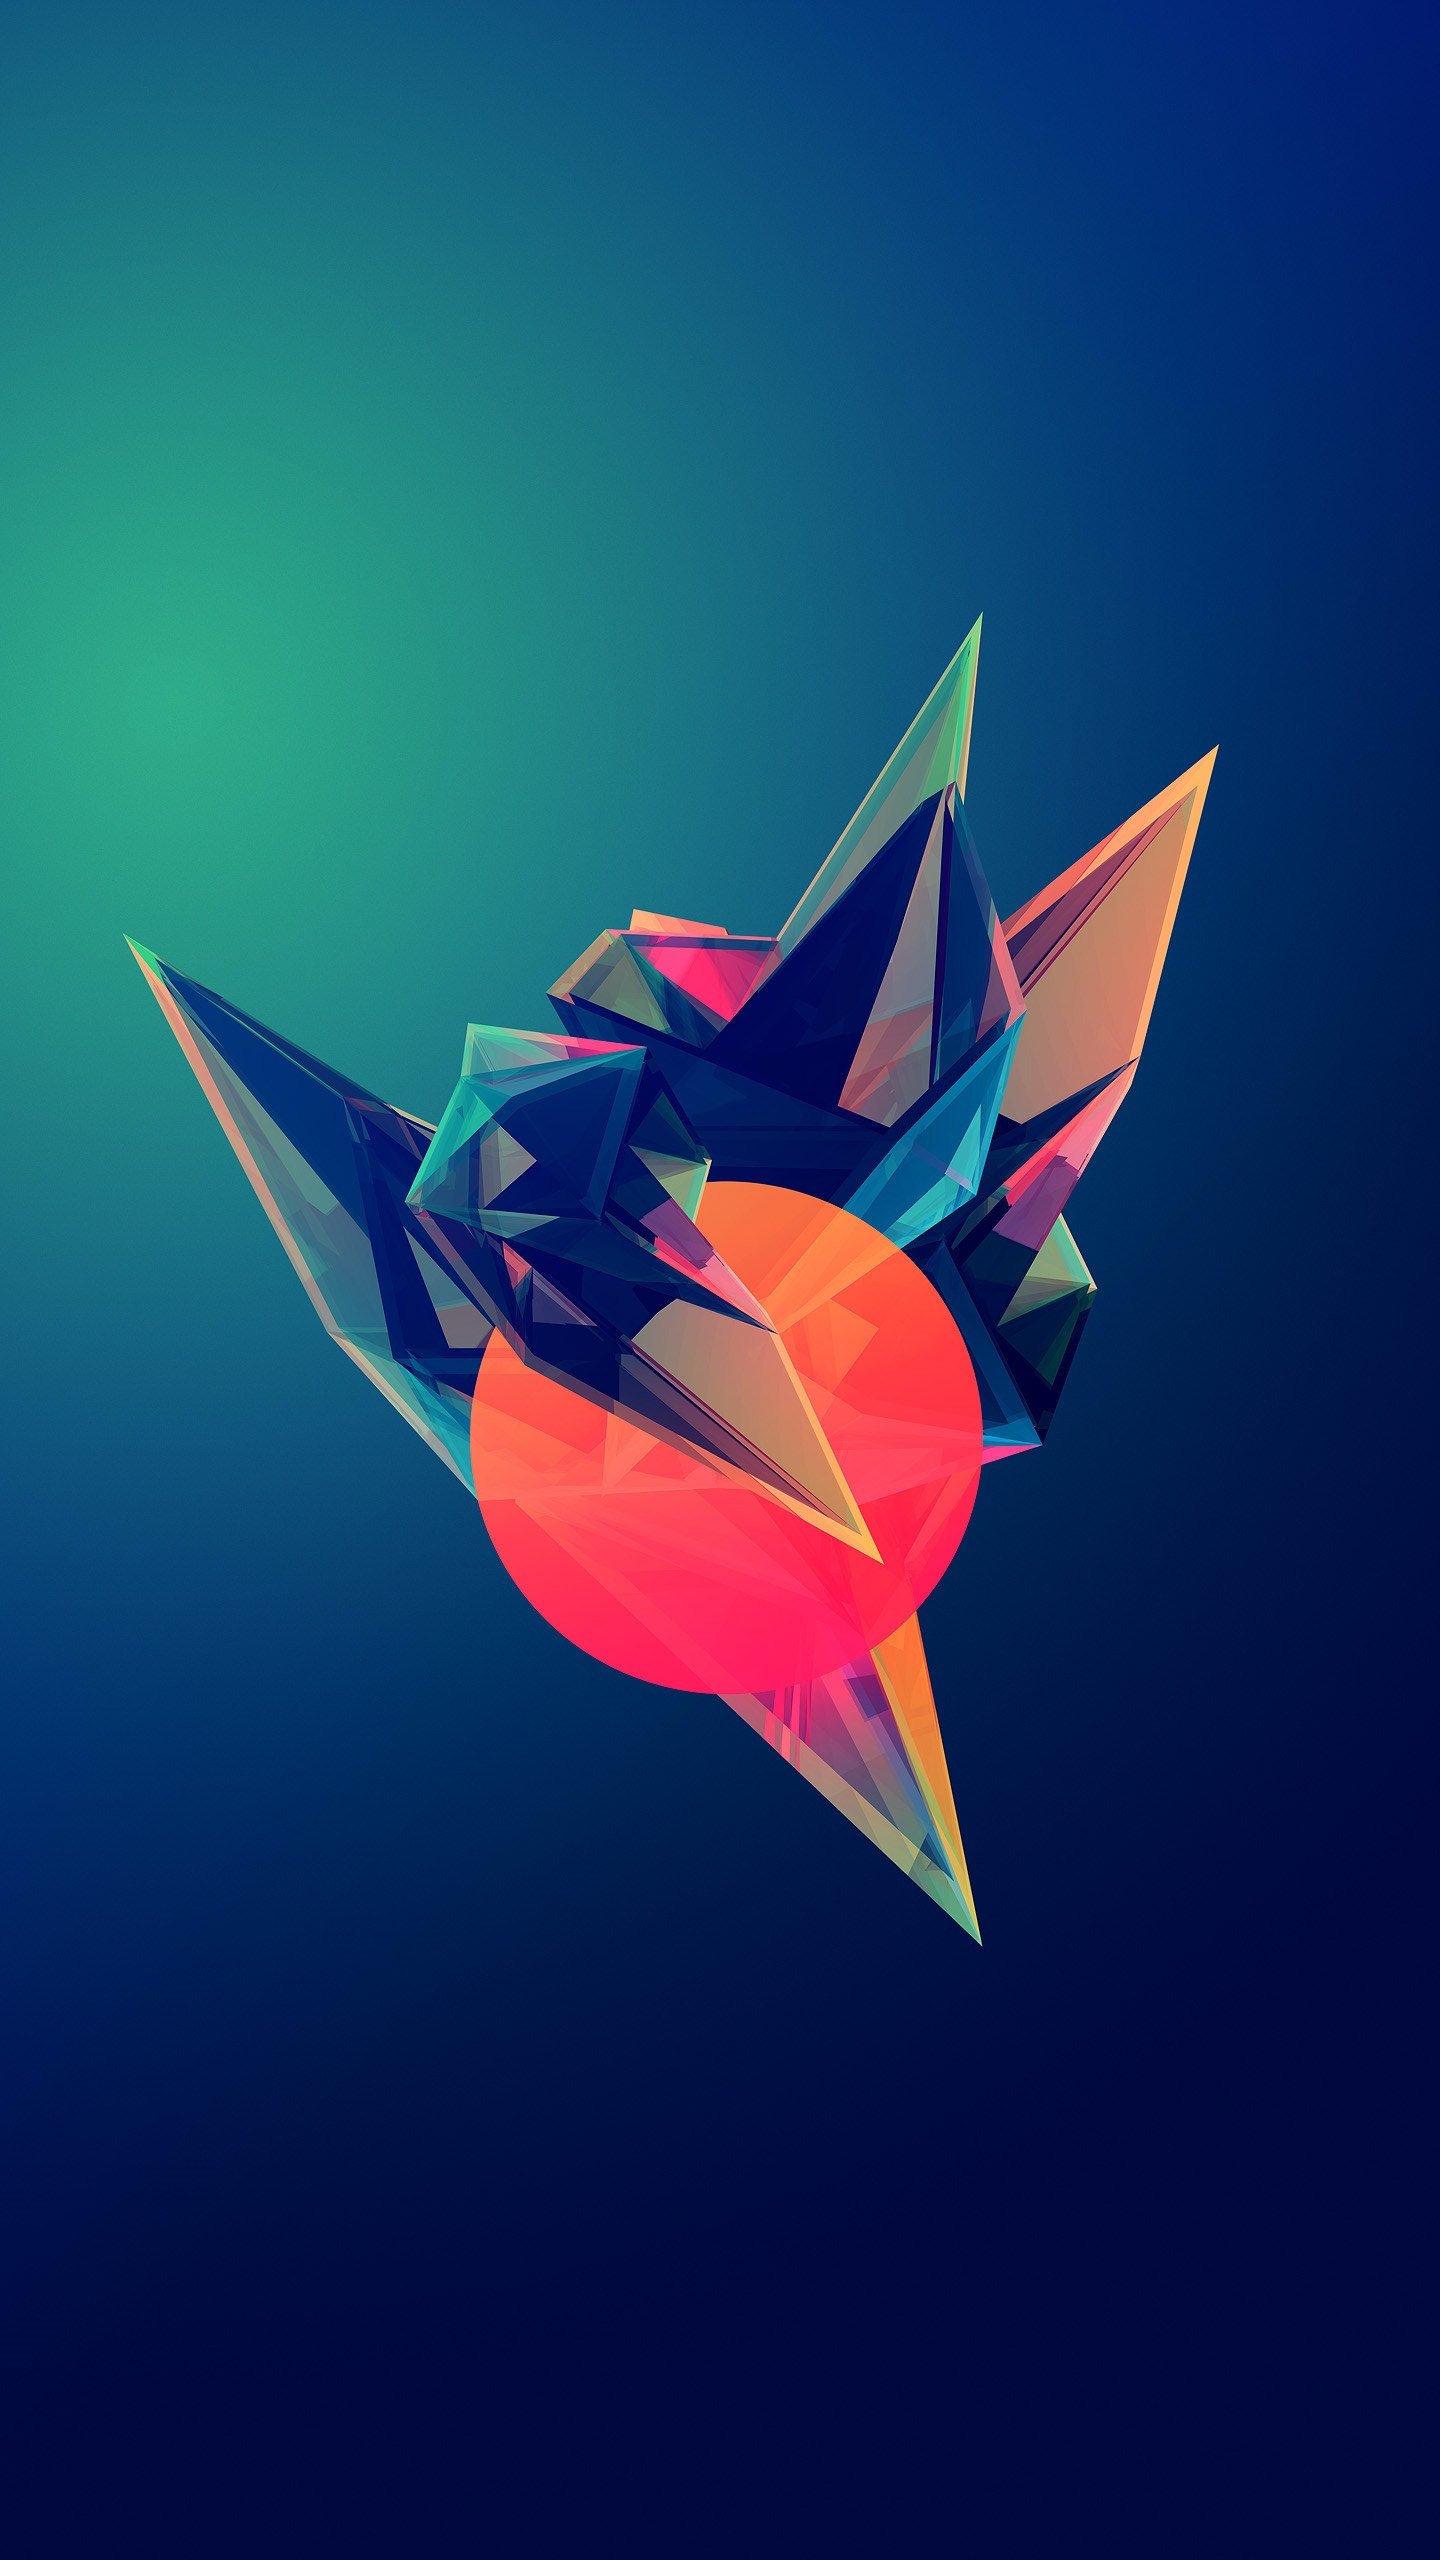 Low Poly Wallpapers Desk Phone   Album on Imgur